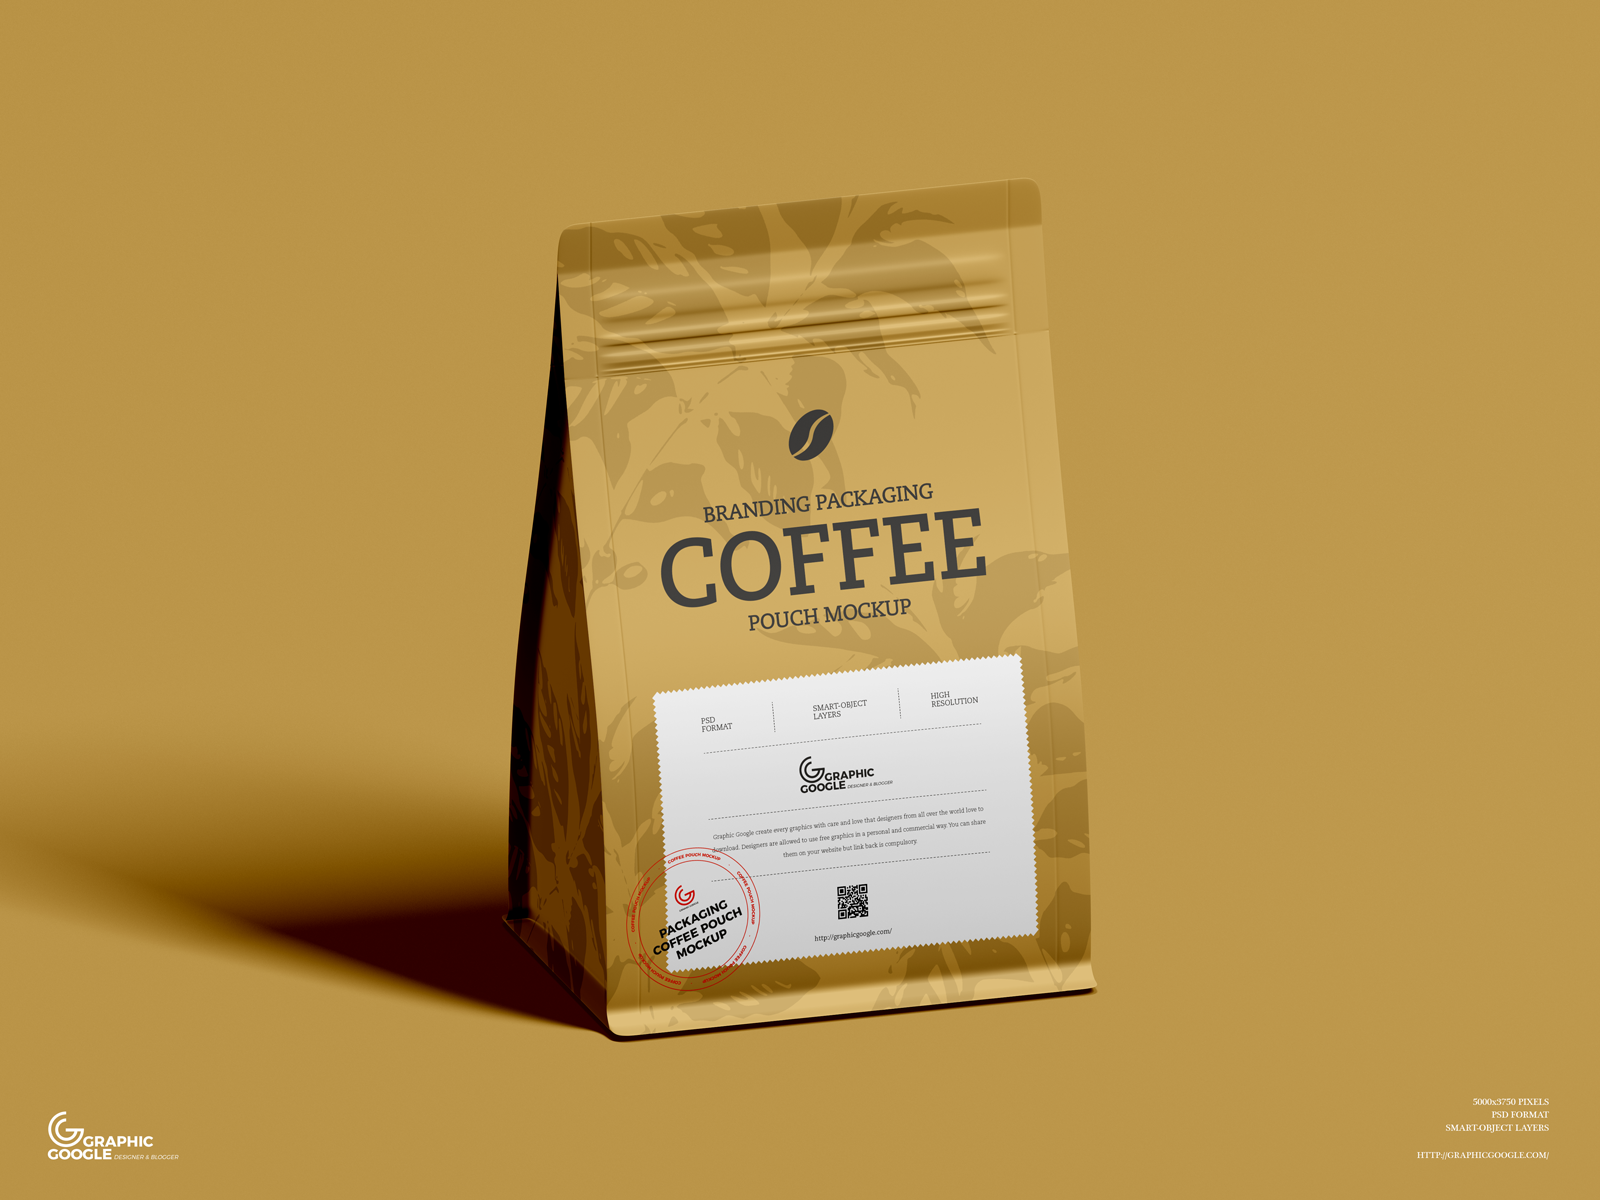 Download Free Coffee Packaging Pouch Mockup By Graphic Google On Dribbble 3D SVG Files Ideas | SVG, Paper Crafts, SVG File